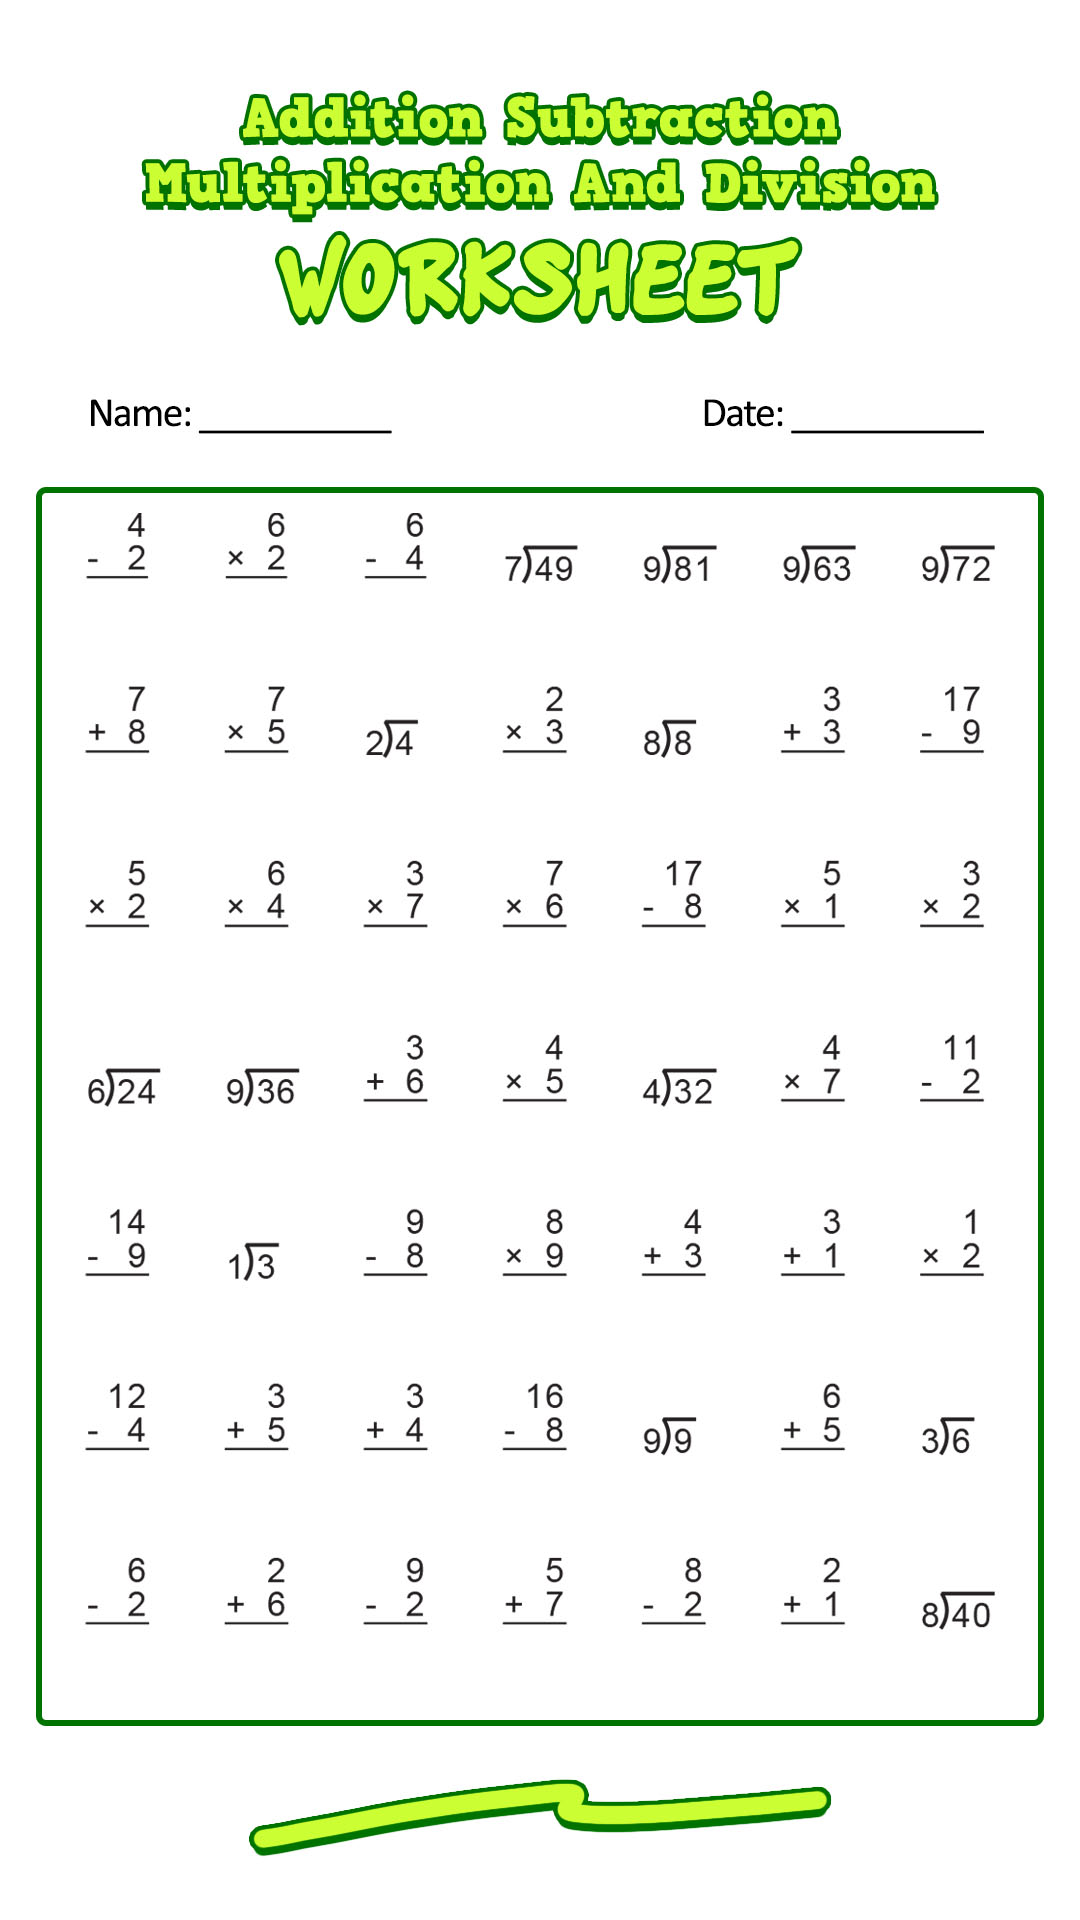 addition-and-subtraction-multiplication-and-division-worksheets-deb